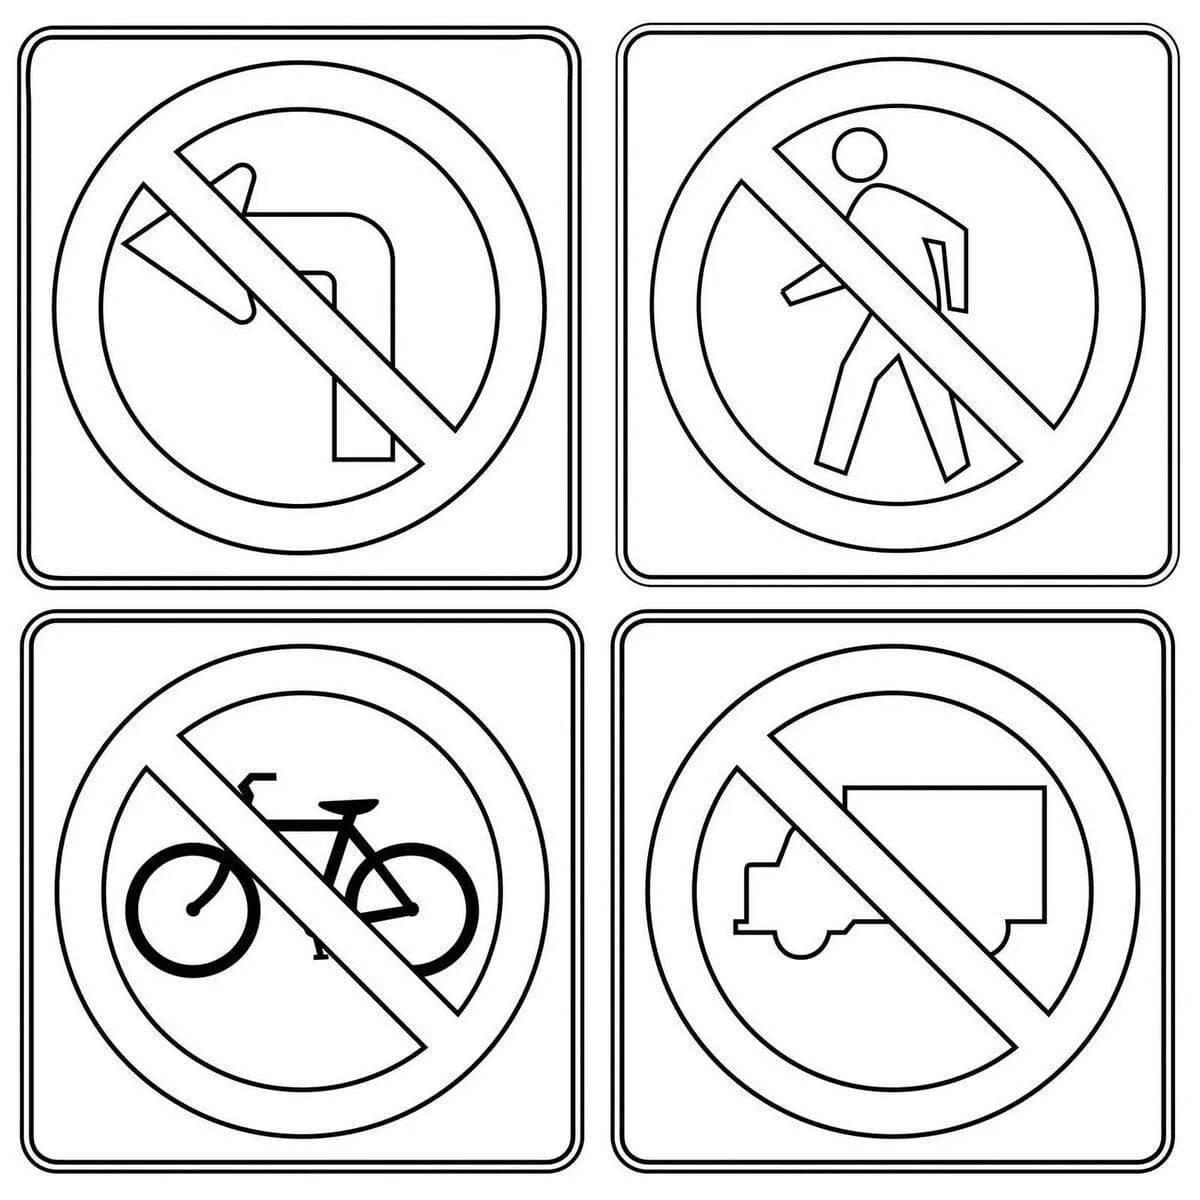 Funny no traffic signs coloring page